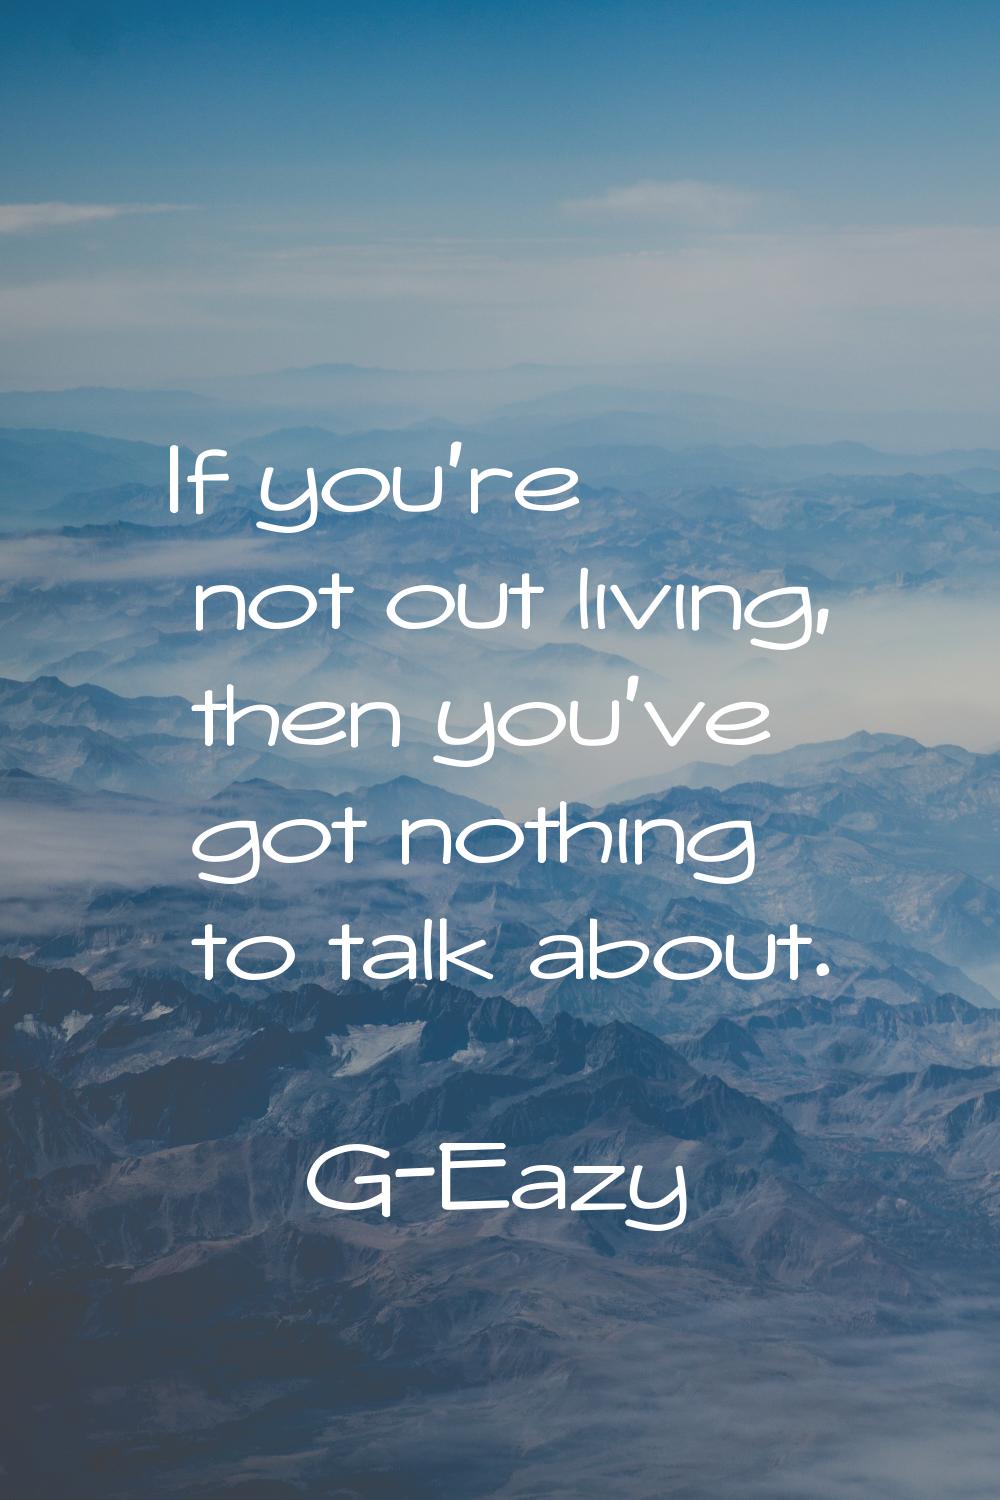 If you're not out living, then you've got nothing to talk about.